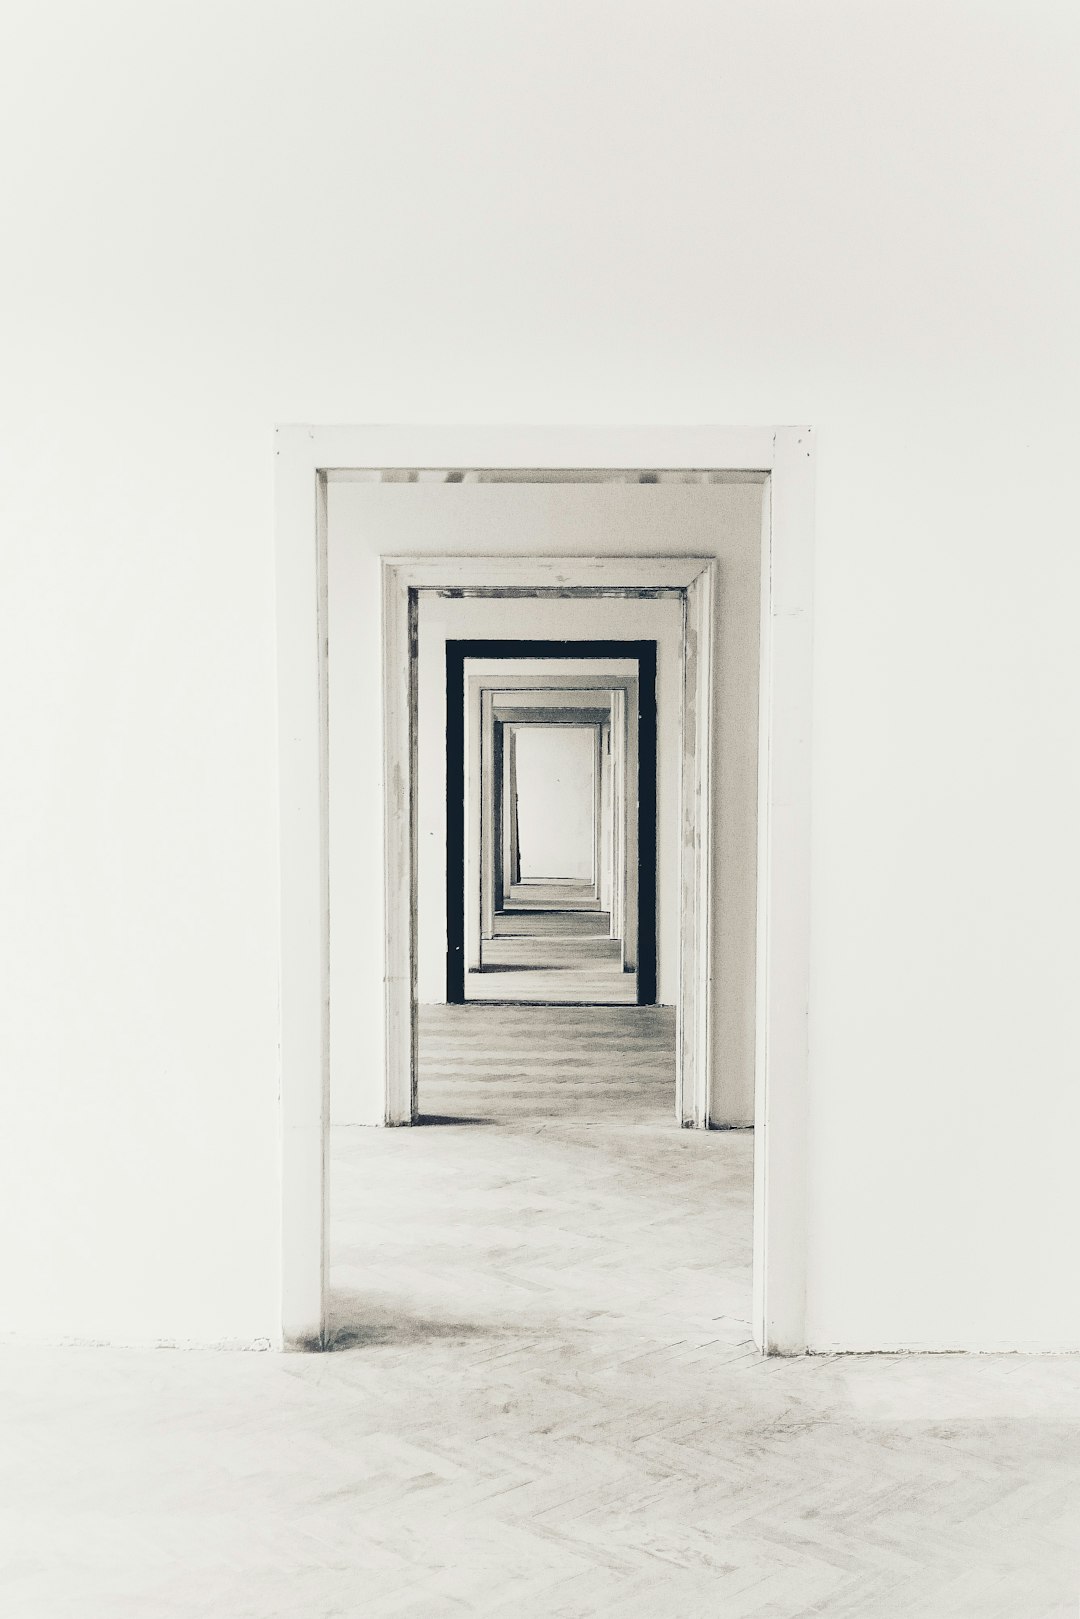 A white room with three doorways, each leading to different rooms, creates an optical illusion of depth and perspective. The doors have thin black frames that highlight their presence in the scene. This is a simple yet powerful visual metaphor for choice or Buddha’s five muddy points, set against a clean background to emphasize its impact on the viewer’s mental state.